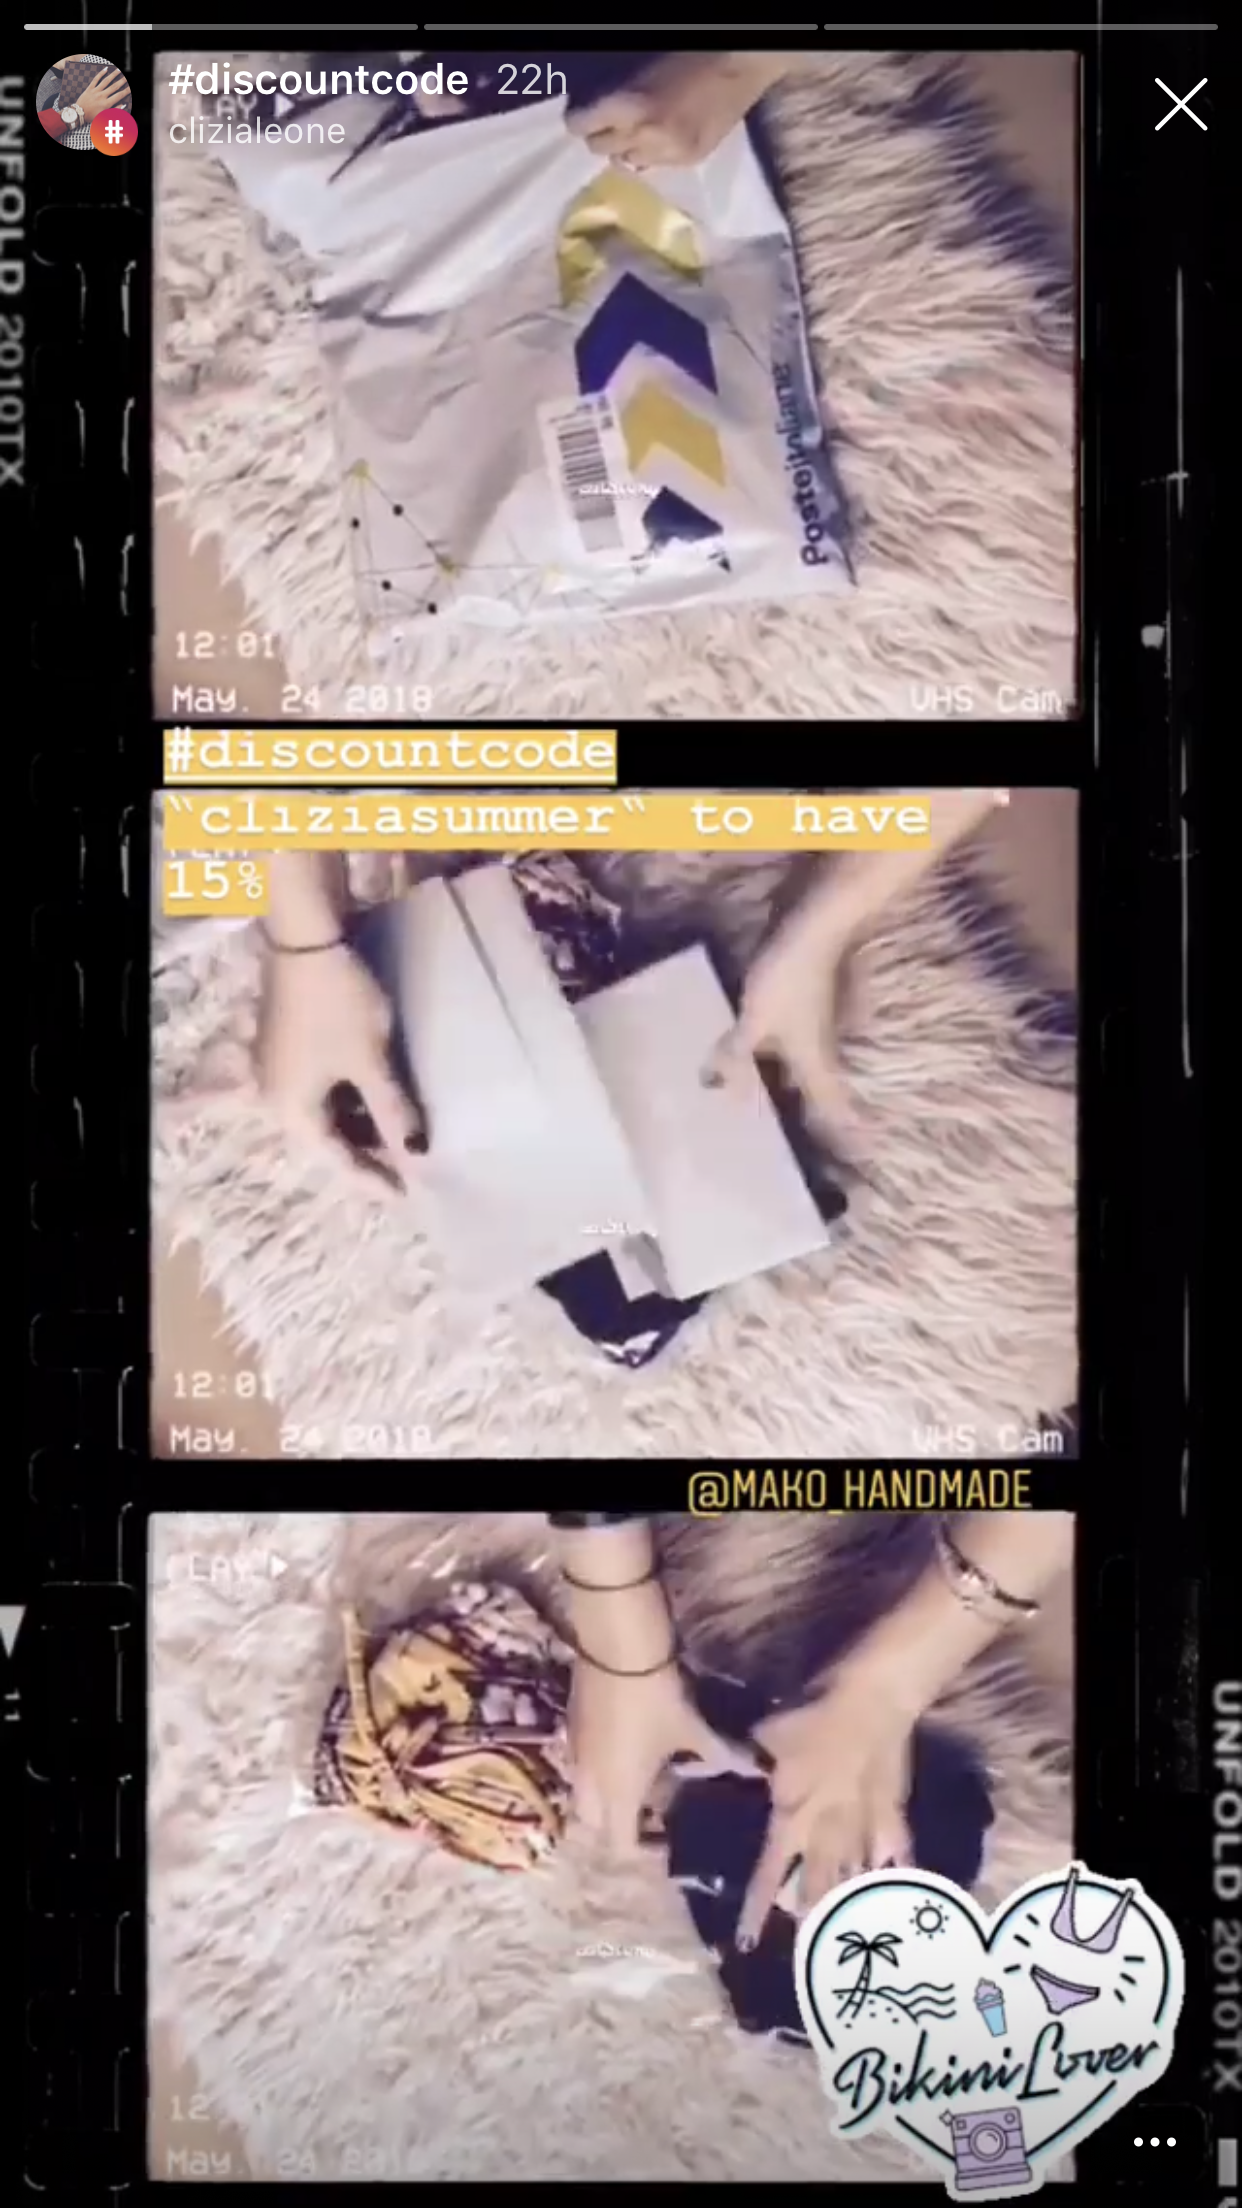 17 Creative Instagram Story Ideas for IGTV And Your Business